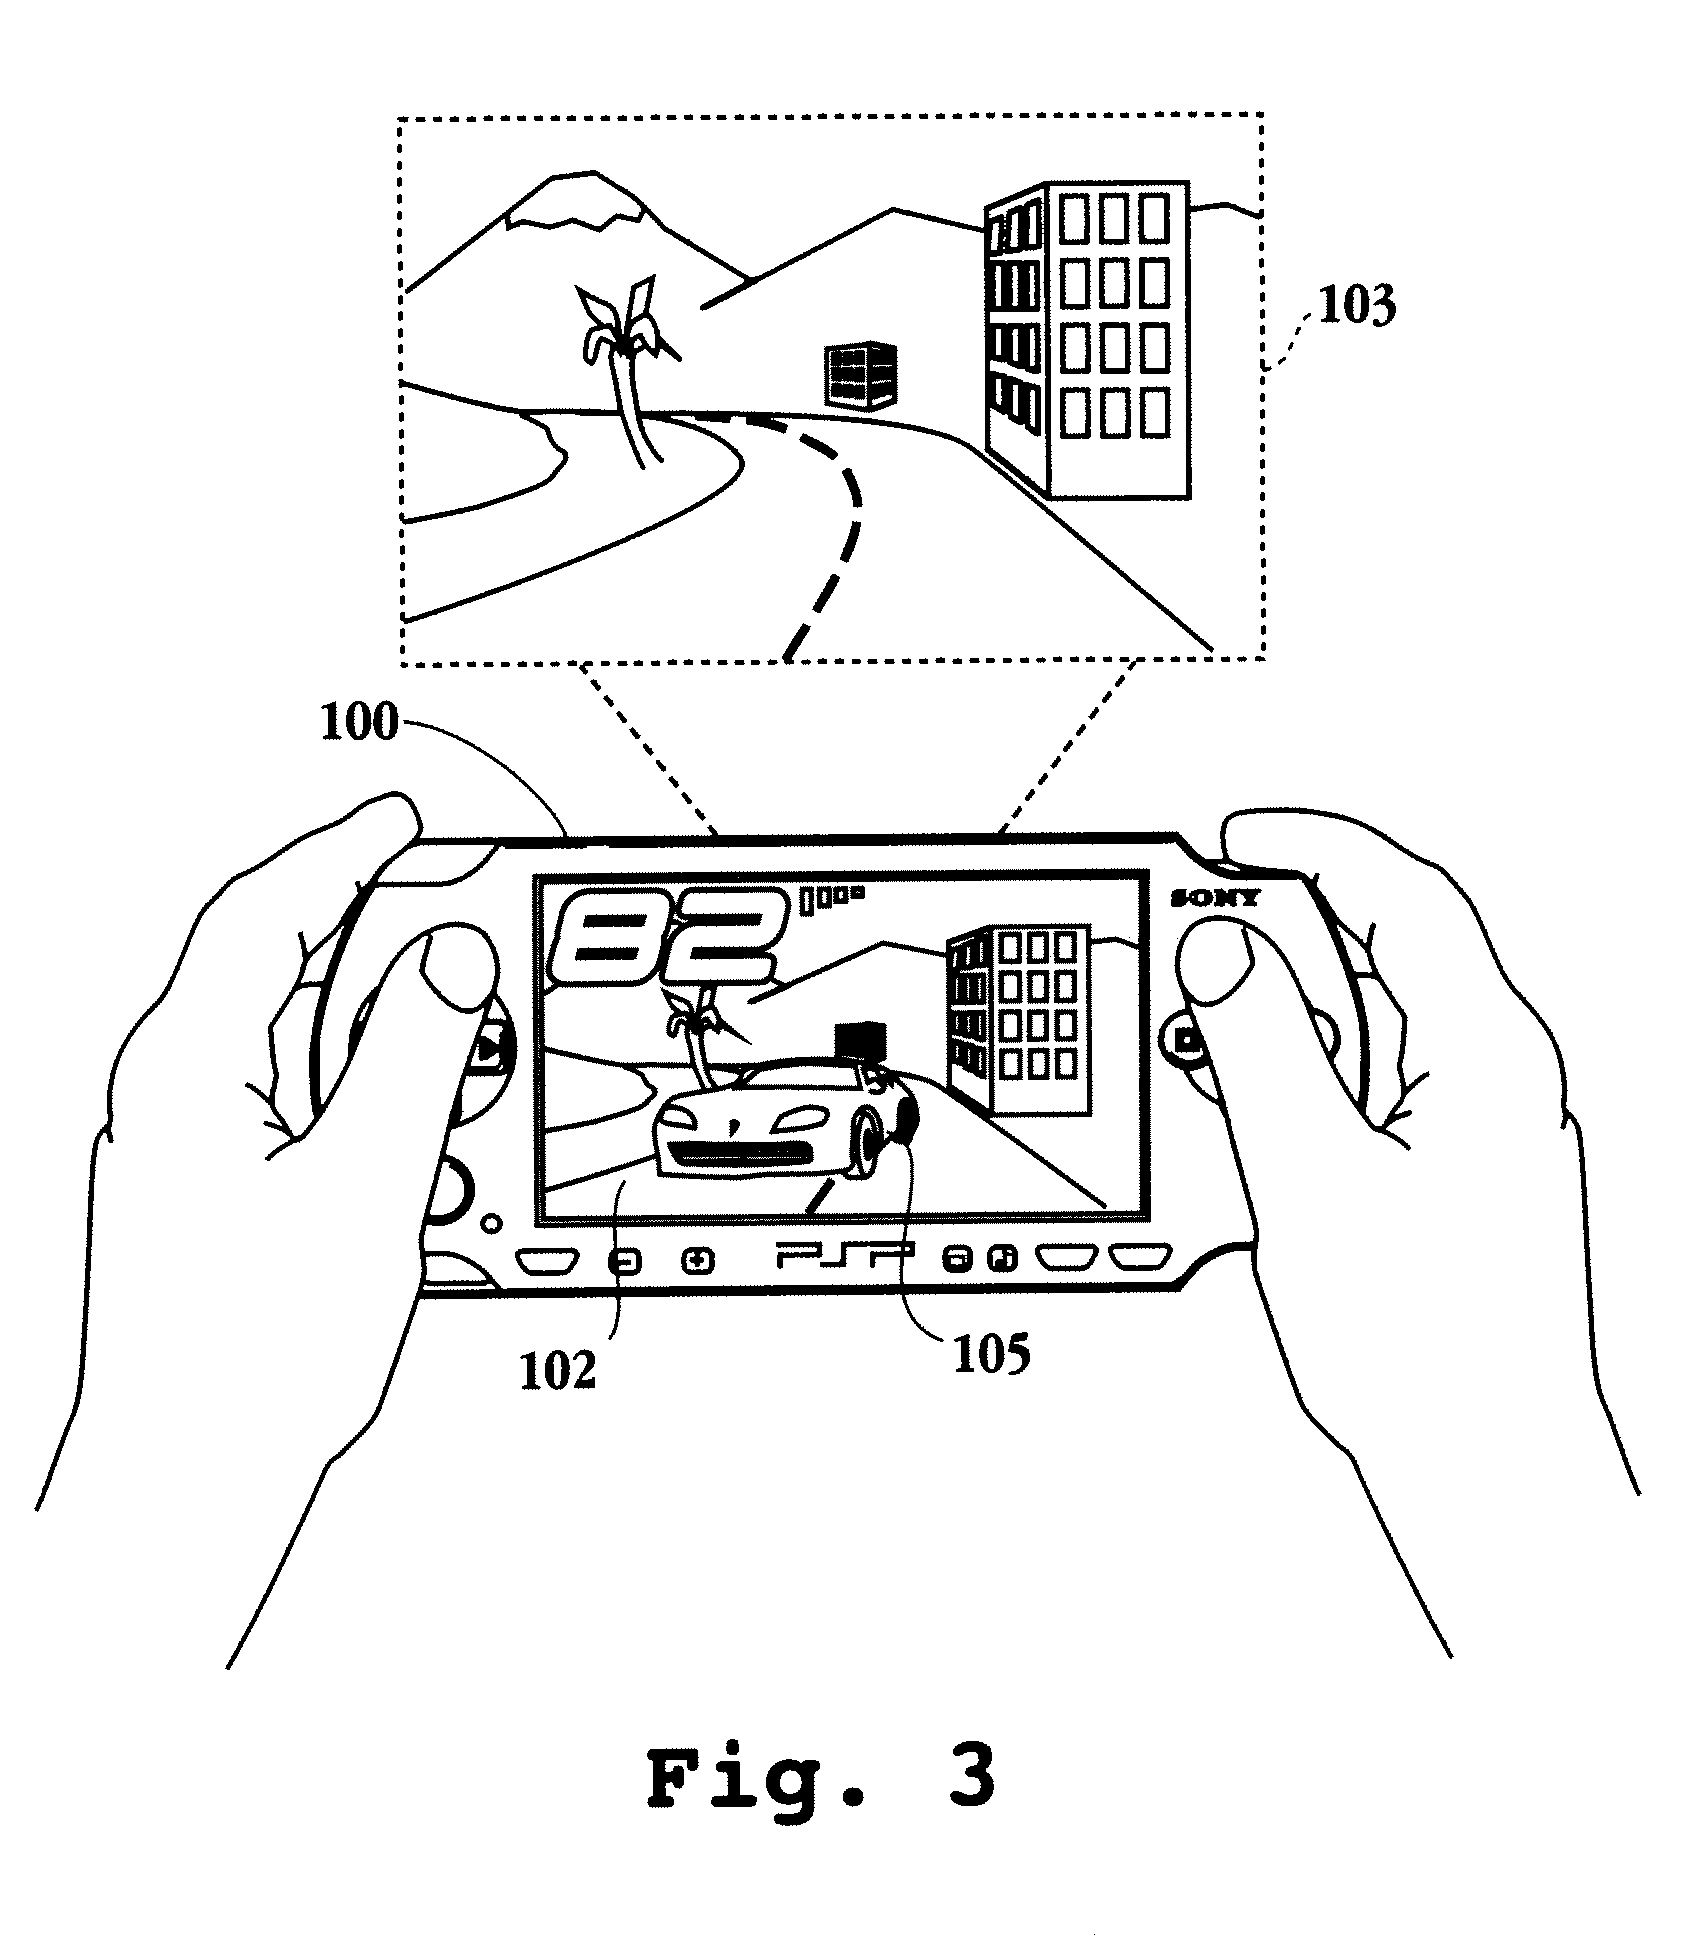 Portable image processing and multimedia interface